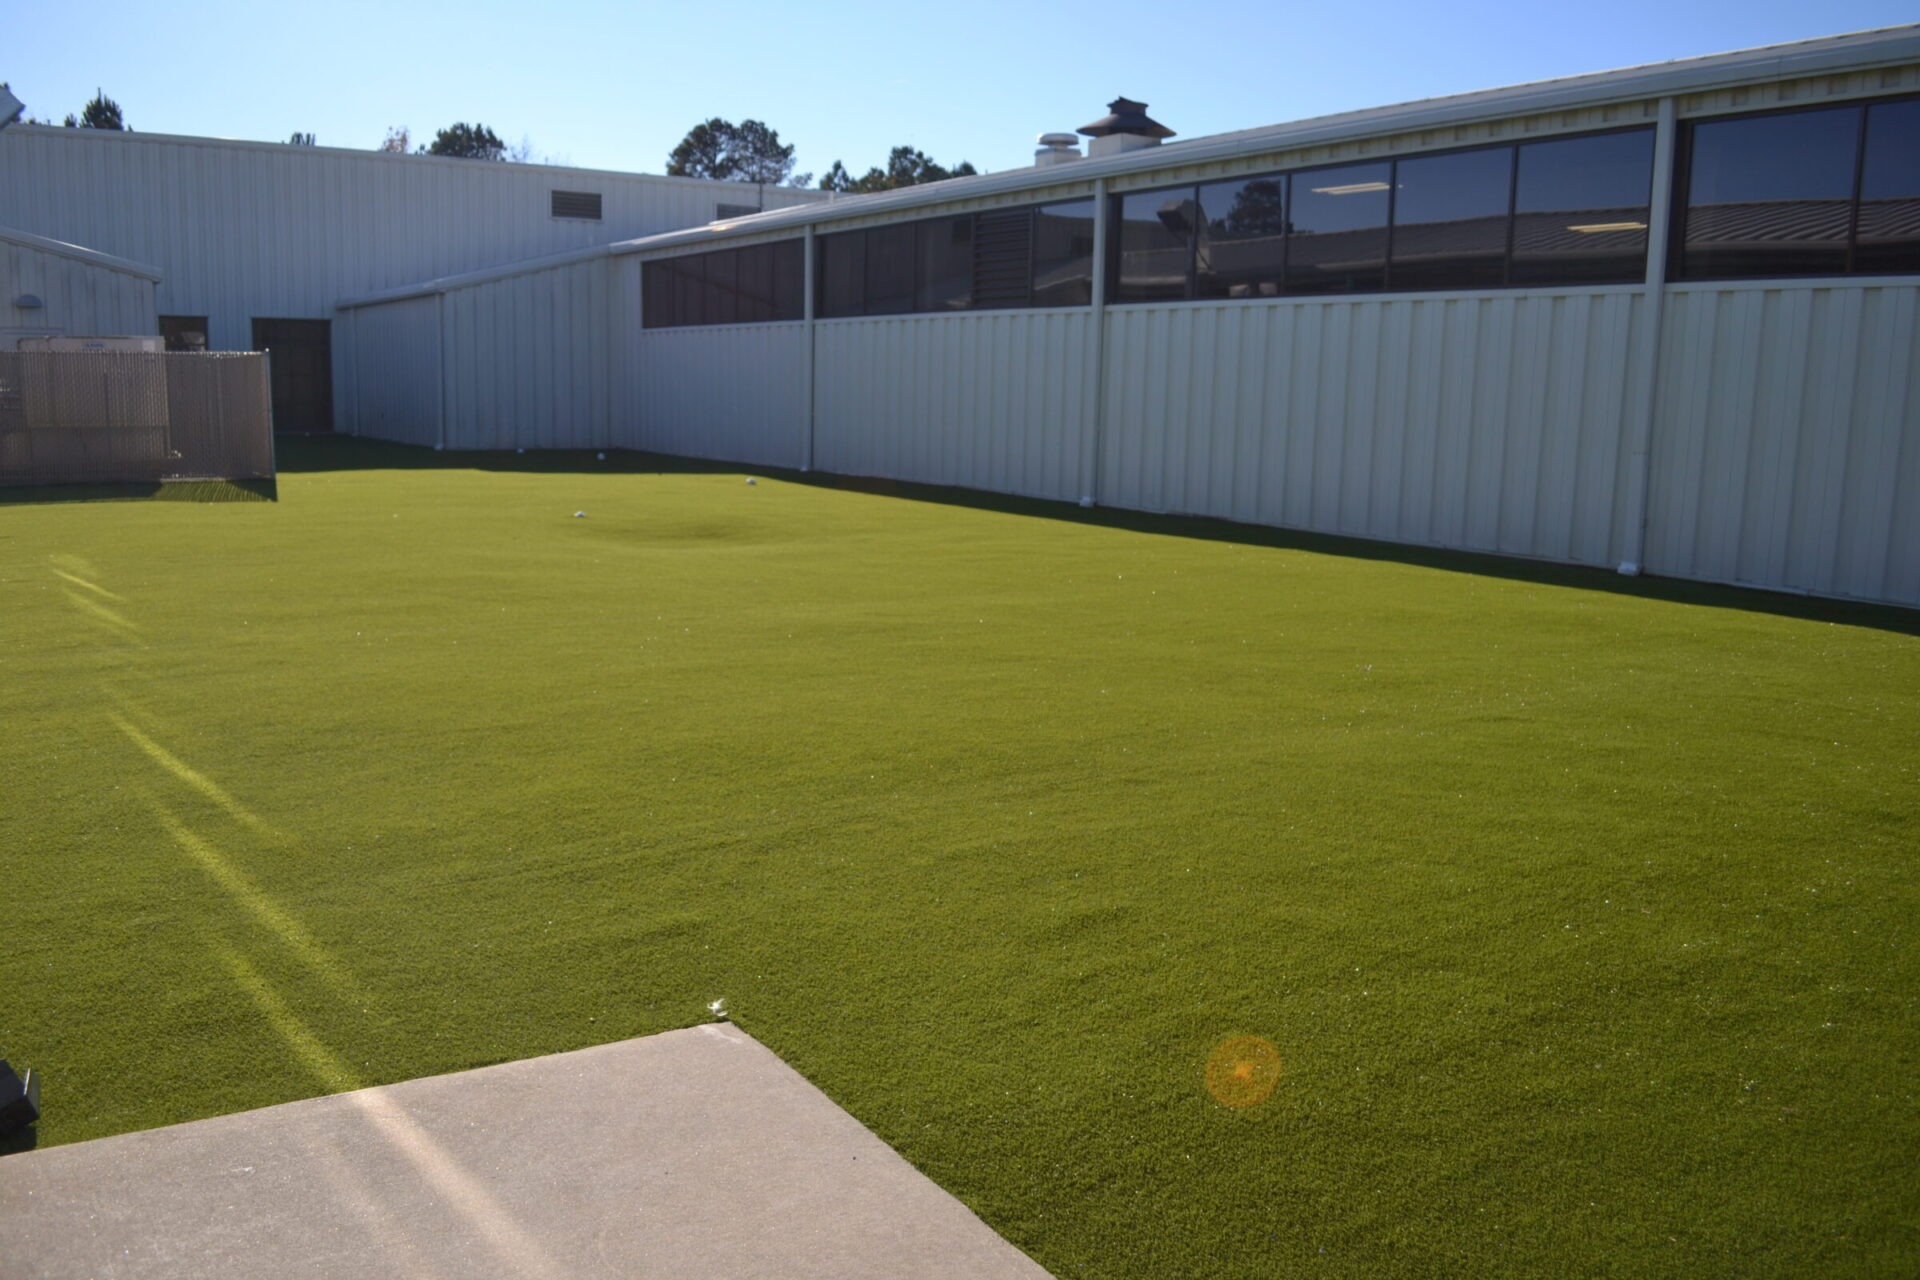 This image shows a large outdoor area covered with green artificial turf, bordered by a white industrial building with numerous windows under a clear sky.